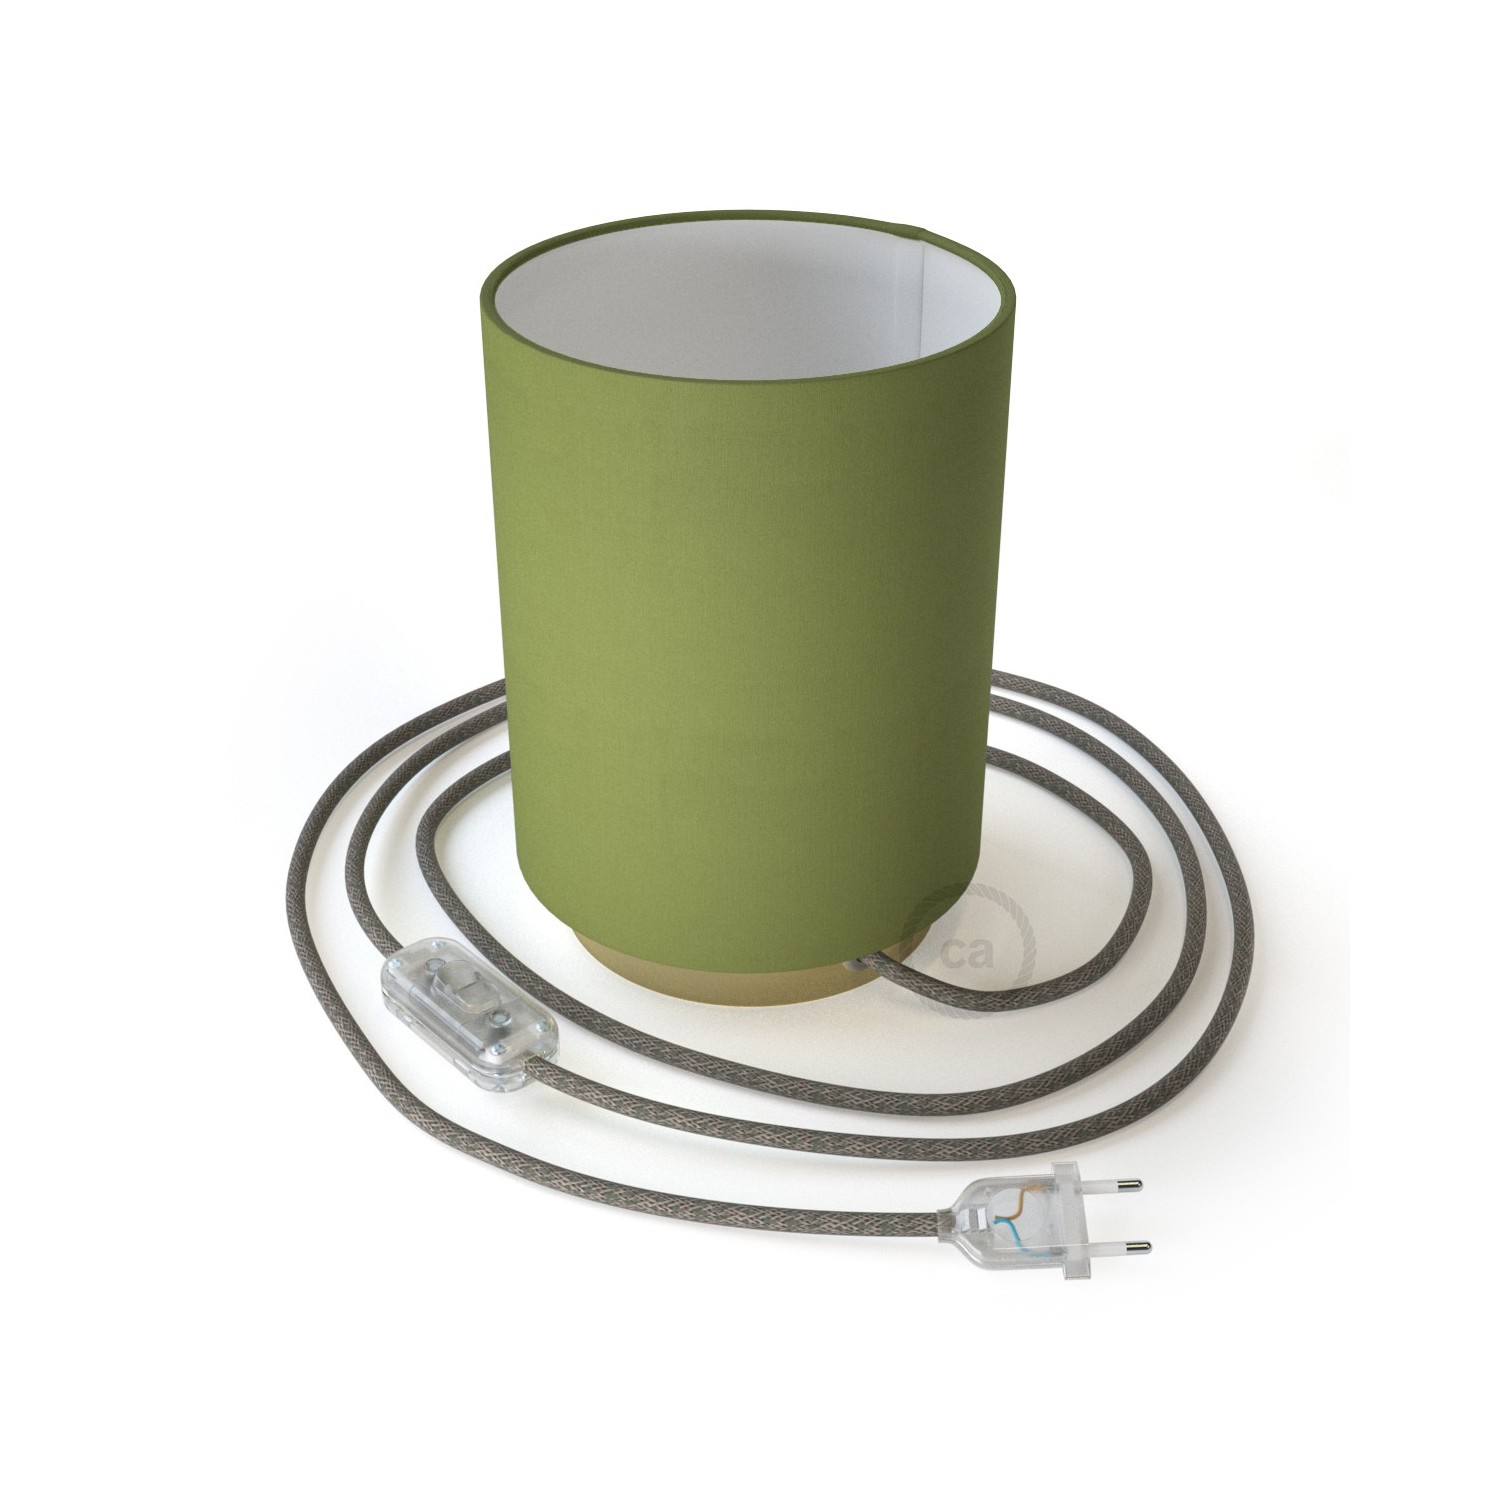 Posaluce in metal with Olive Green Canvas Cilindro lampshade, complete with fabric cable, switch and 2-pin plug